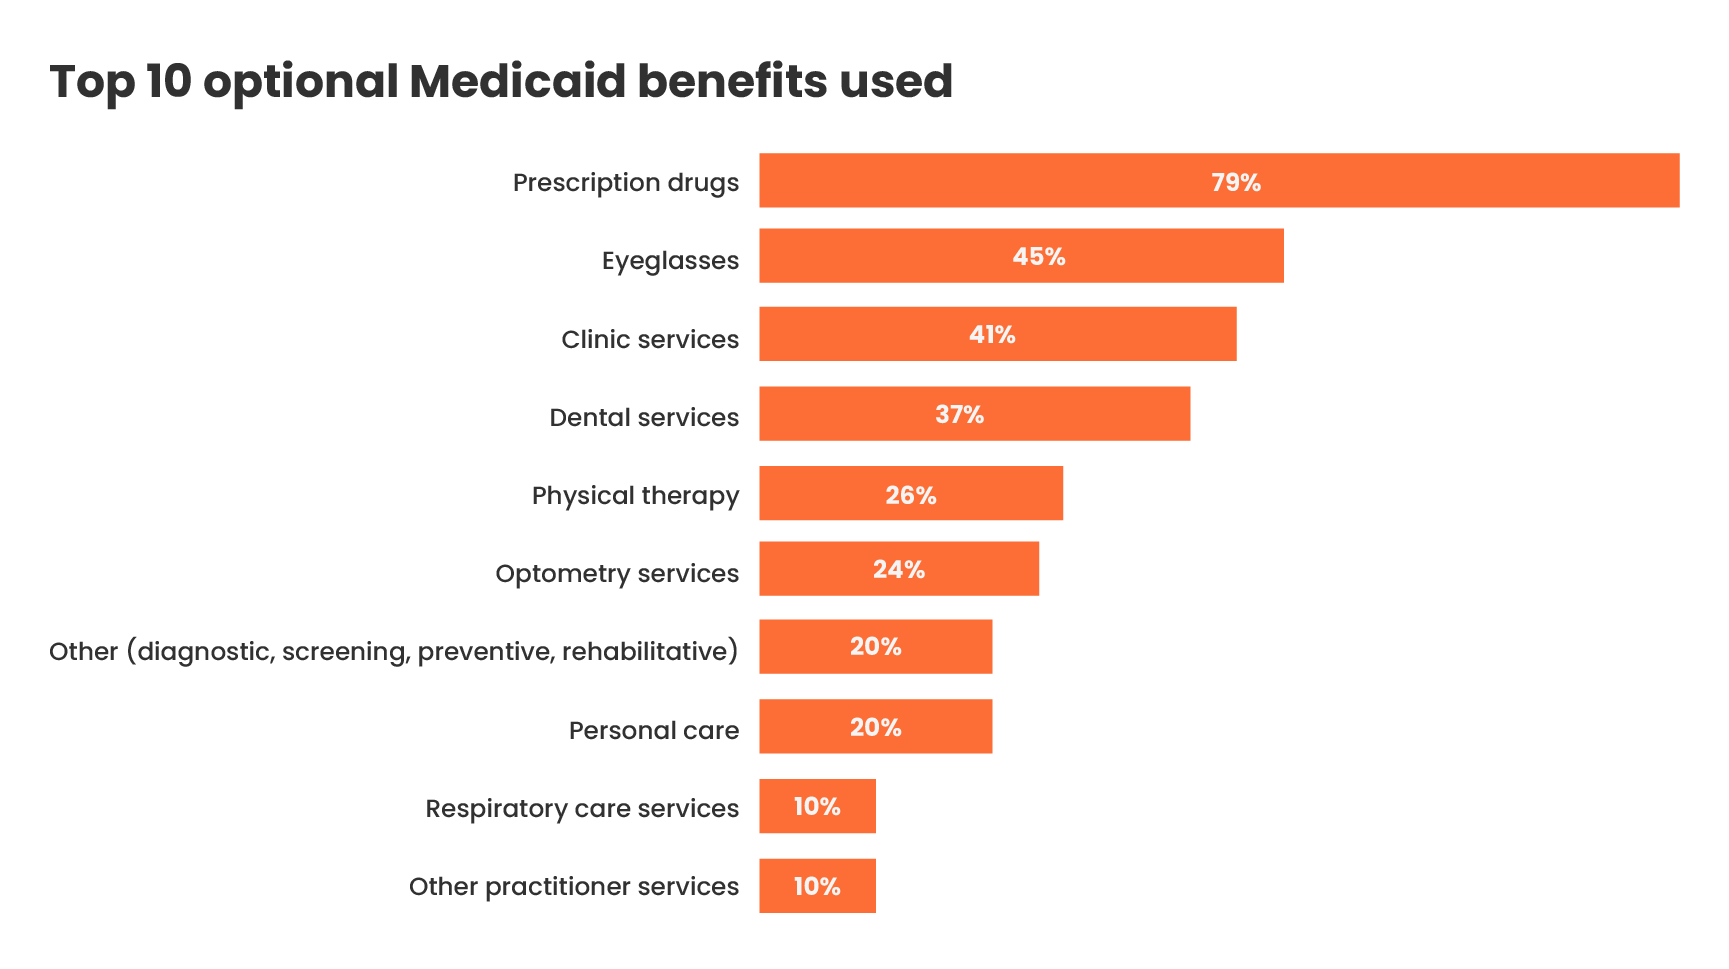 Top 10 optional Medicaid benefits used:Prescription Drugs 79% Eyeglasses 45% Clinic services 41% Dental Services 37% Physical therapy 26% Optometry services 24% Other (diagnostic, screening, preventive, rehabilitative) 20% Personal Care 20% Respiratory care services 10% Other practitioner services 10%